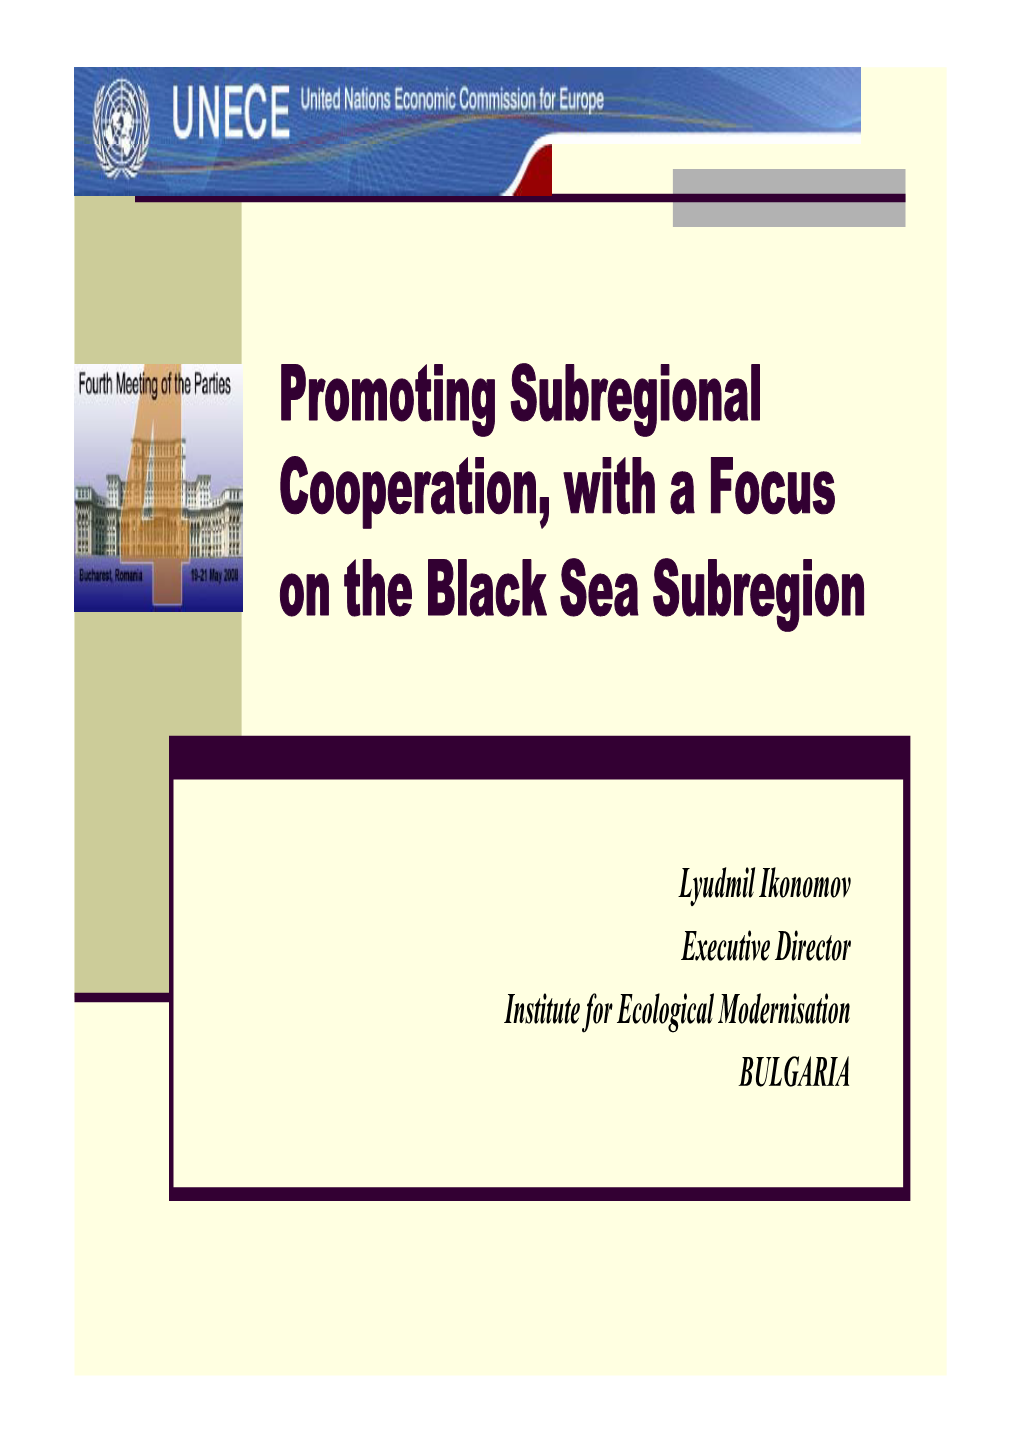 Promoting Subregional Cooperation, with a Focus on the Black Sea Subregion